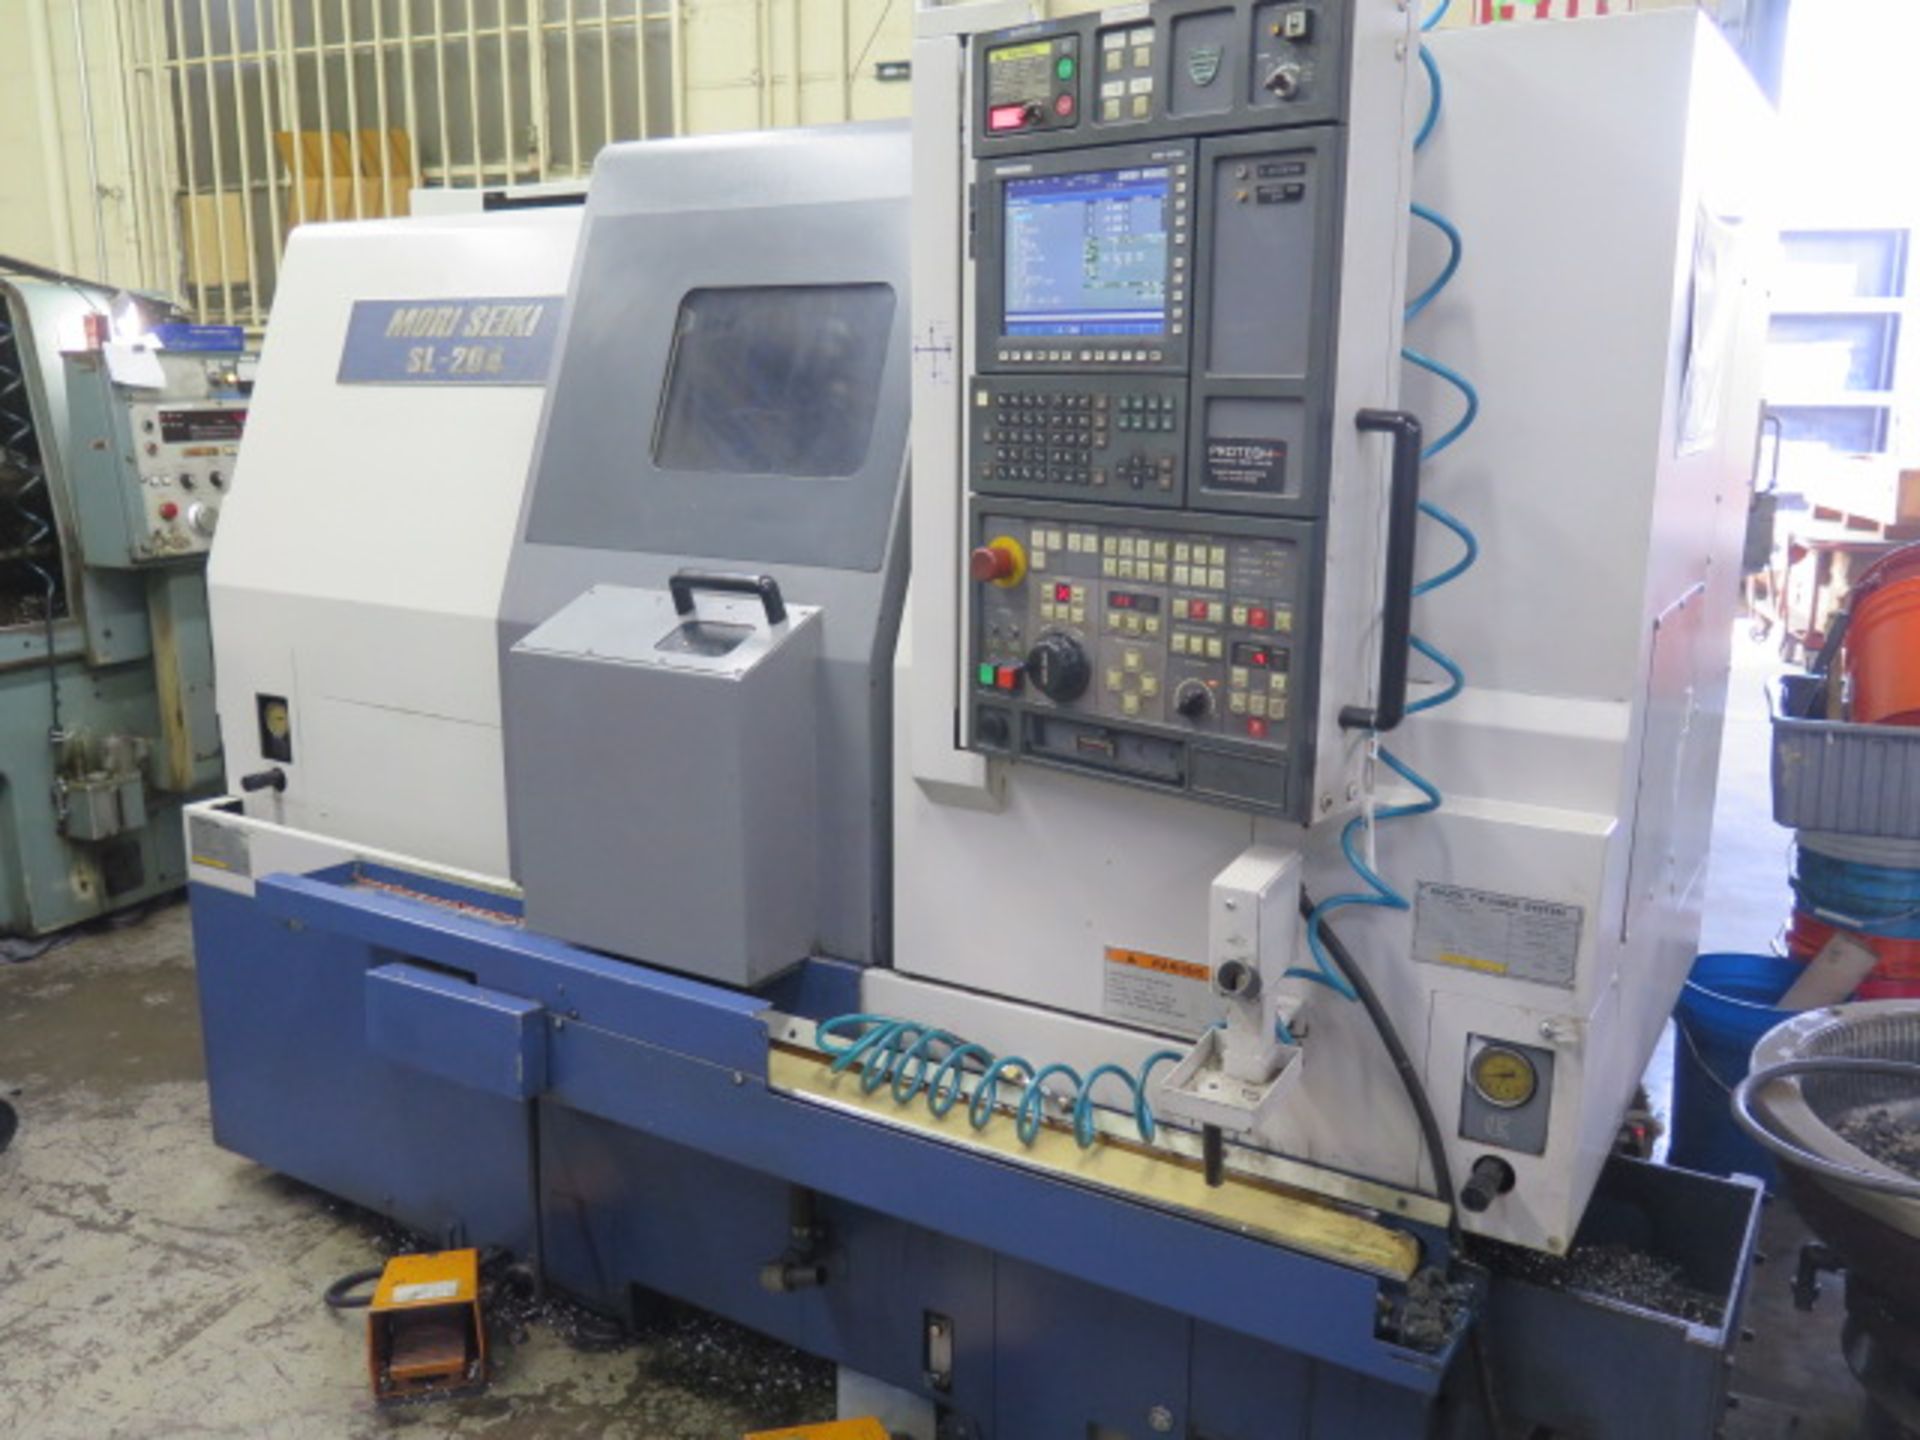 Mori Seiki SL-204S/500 Twin Spindle CNC Turning Center s/n SL200AE1390 Mori MSX-805 III, SOLD AS IS - Image 2 of 20